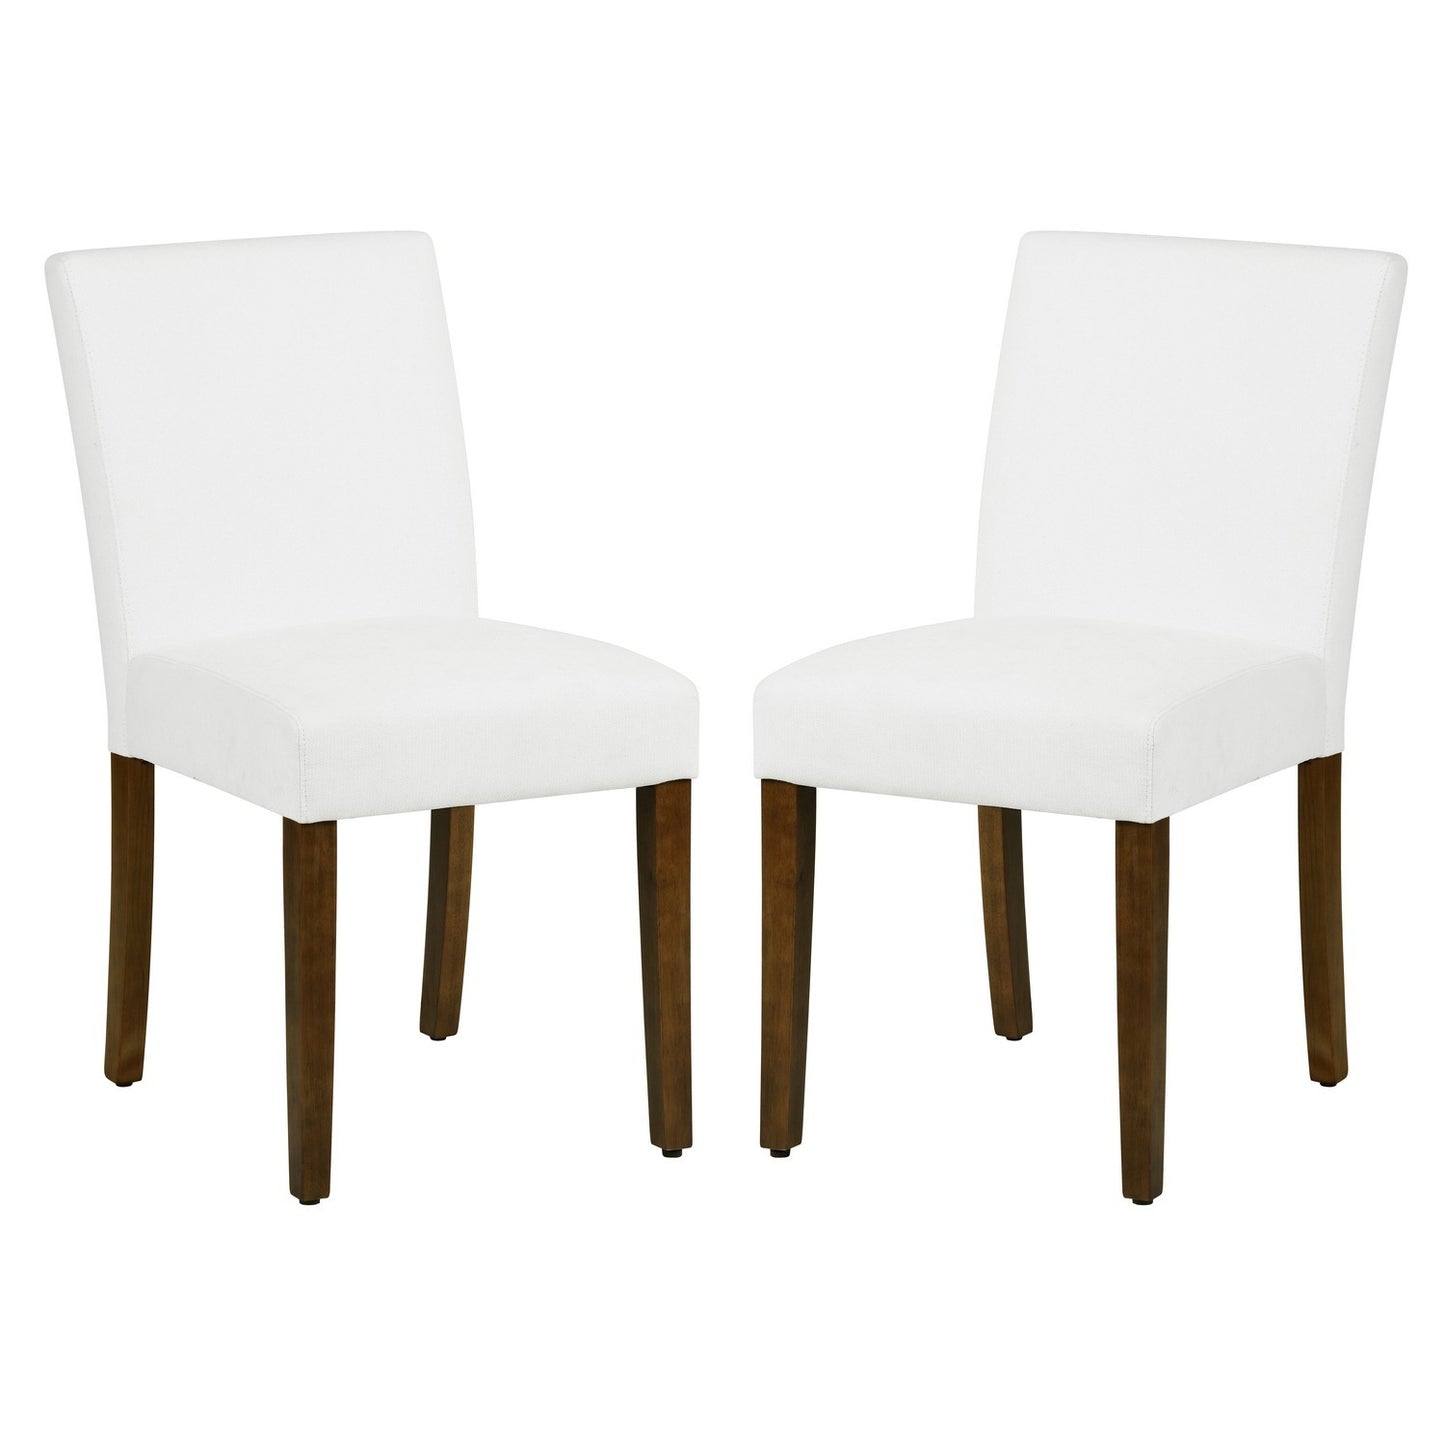 Upholstered Dining Chairs Set of 2 Modern Dining Chairs with Solid Wood Legs, WHITE